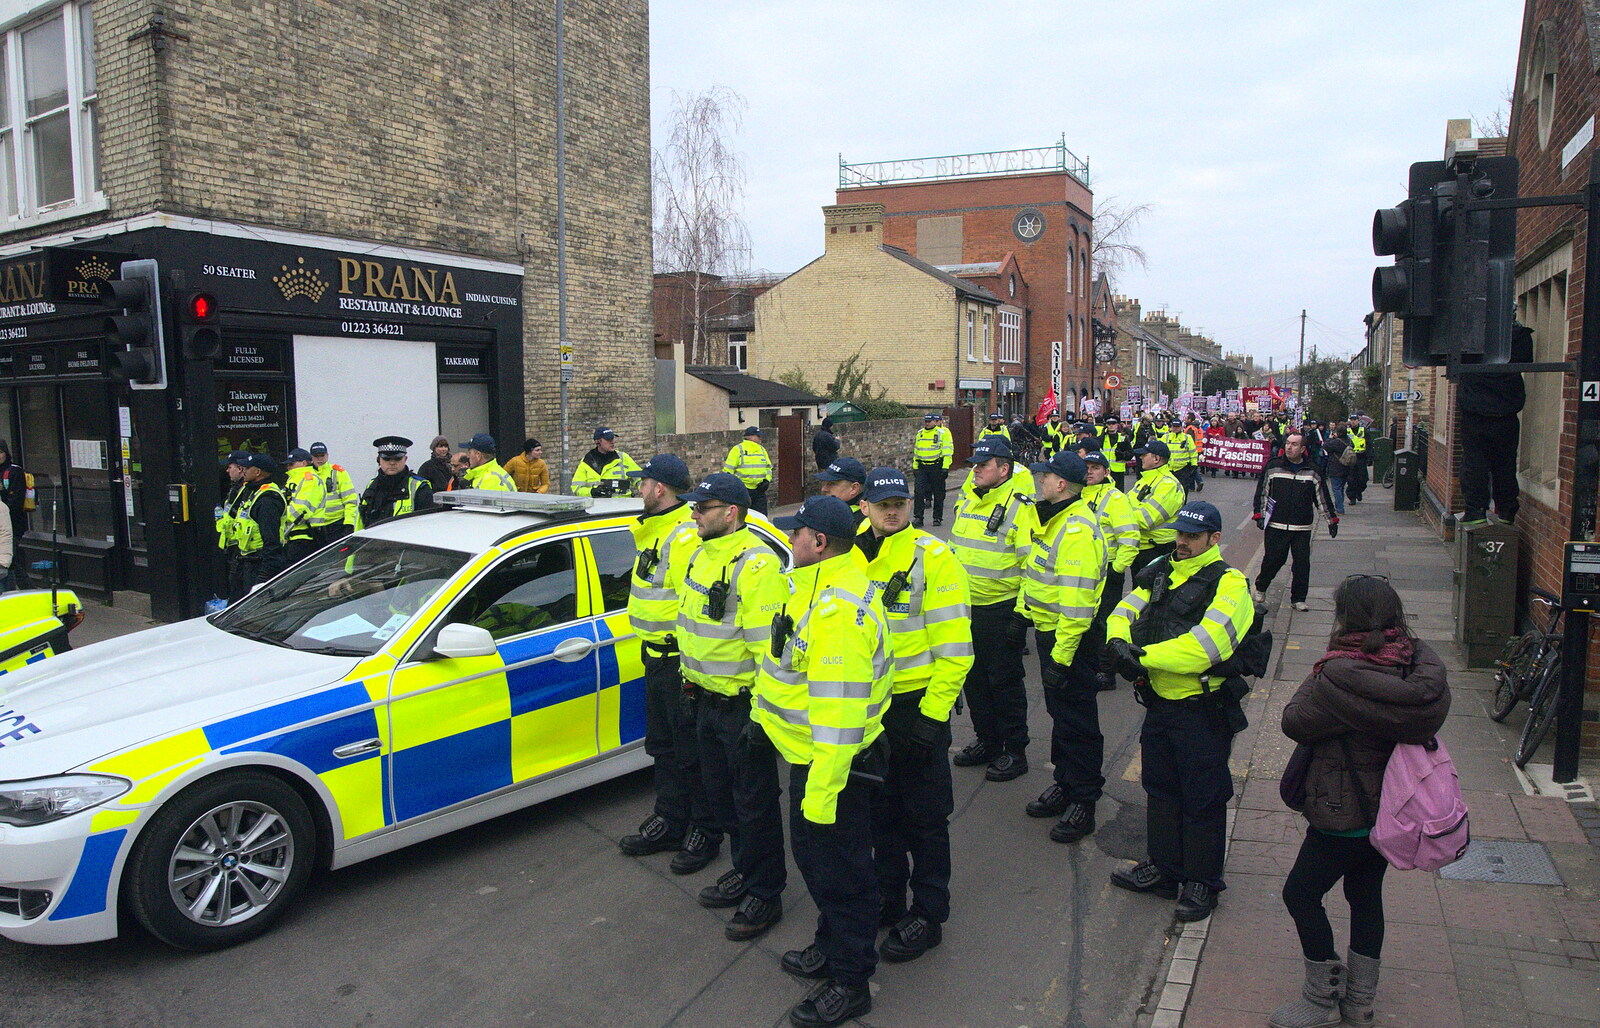 There's a big police presence from An Anti-Fascist March, Mill Road, Cambridge - 23rd February 2013